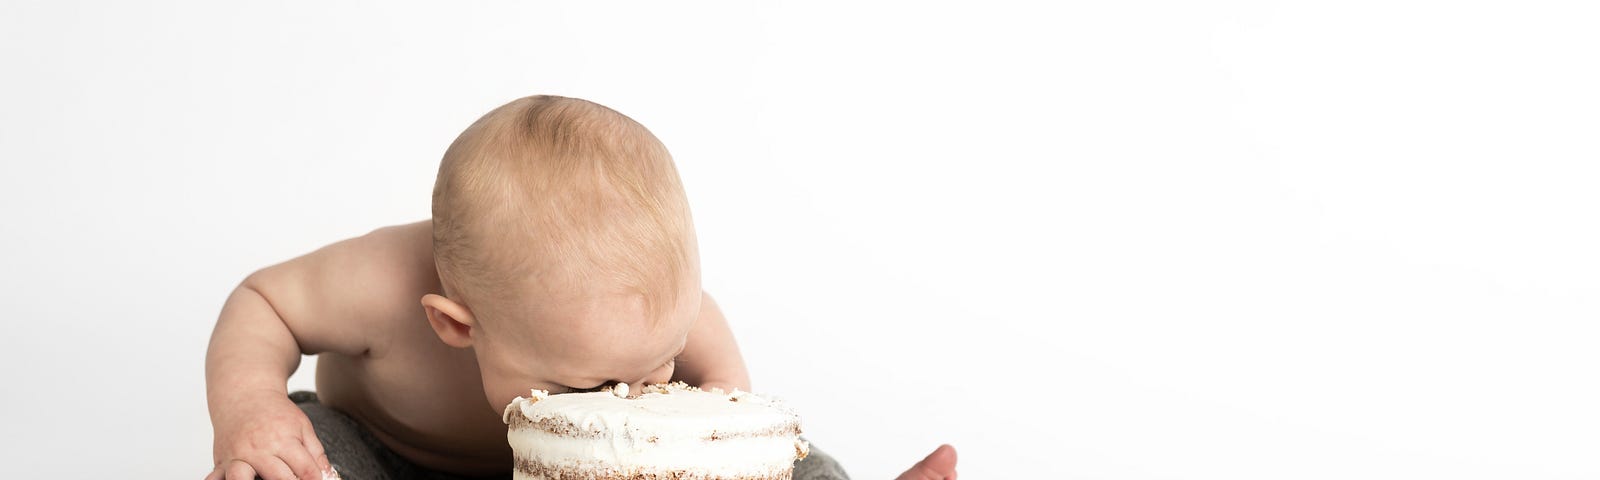 baby diving headfirst into cake